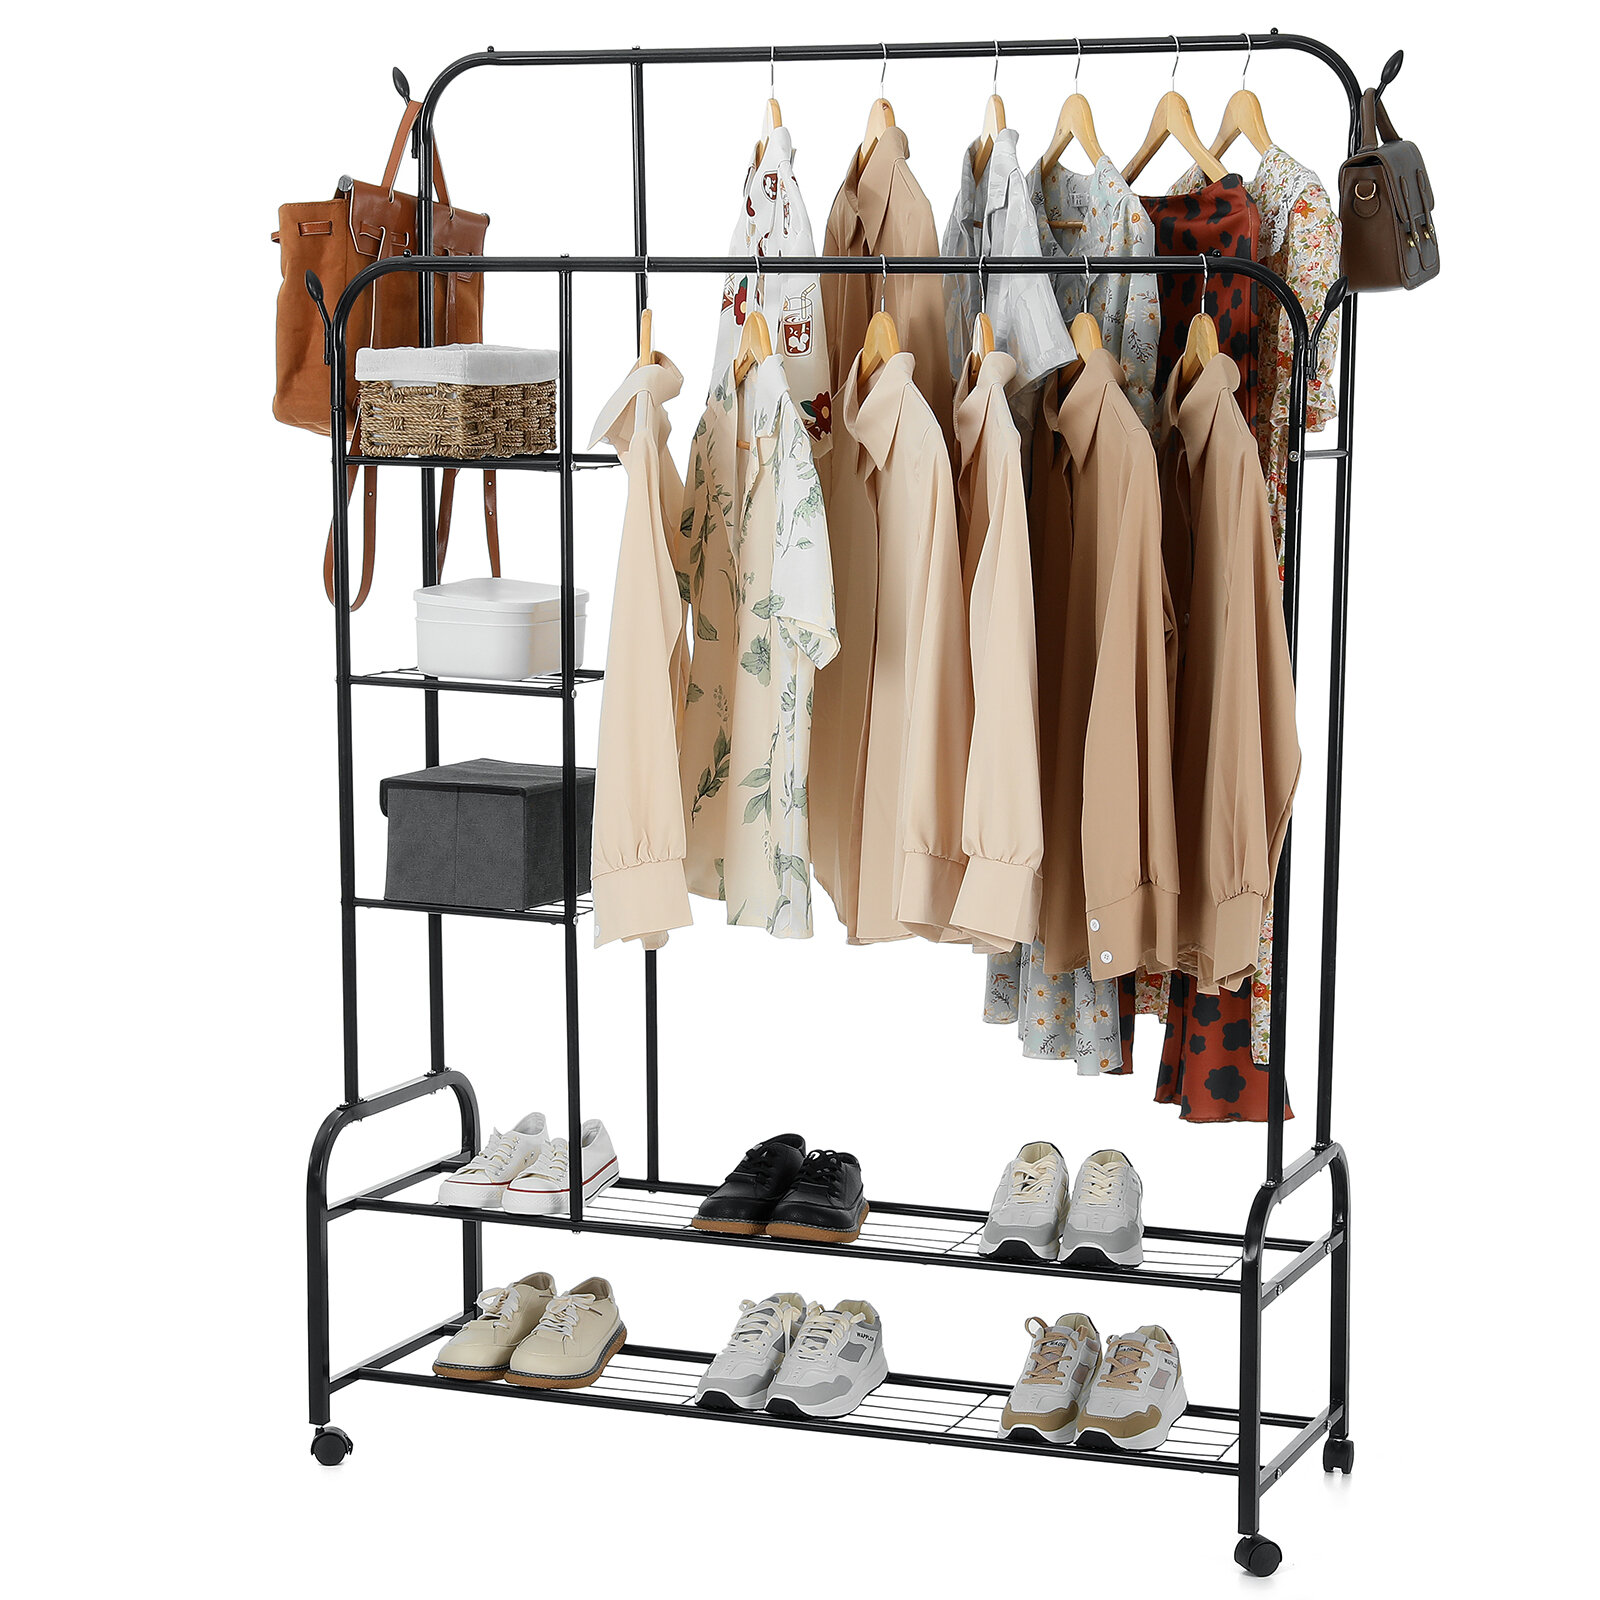 

HONEIER Double Rods Clothes Rack Clothing Rack with Wheels 2-Tier Shoes Rack 3-Tier Shelves Garment Rack for Hanging Clo